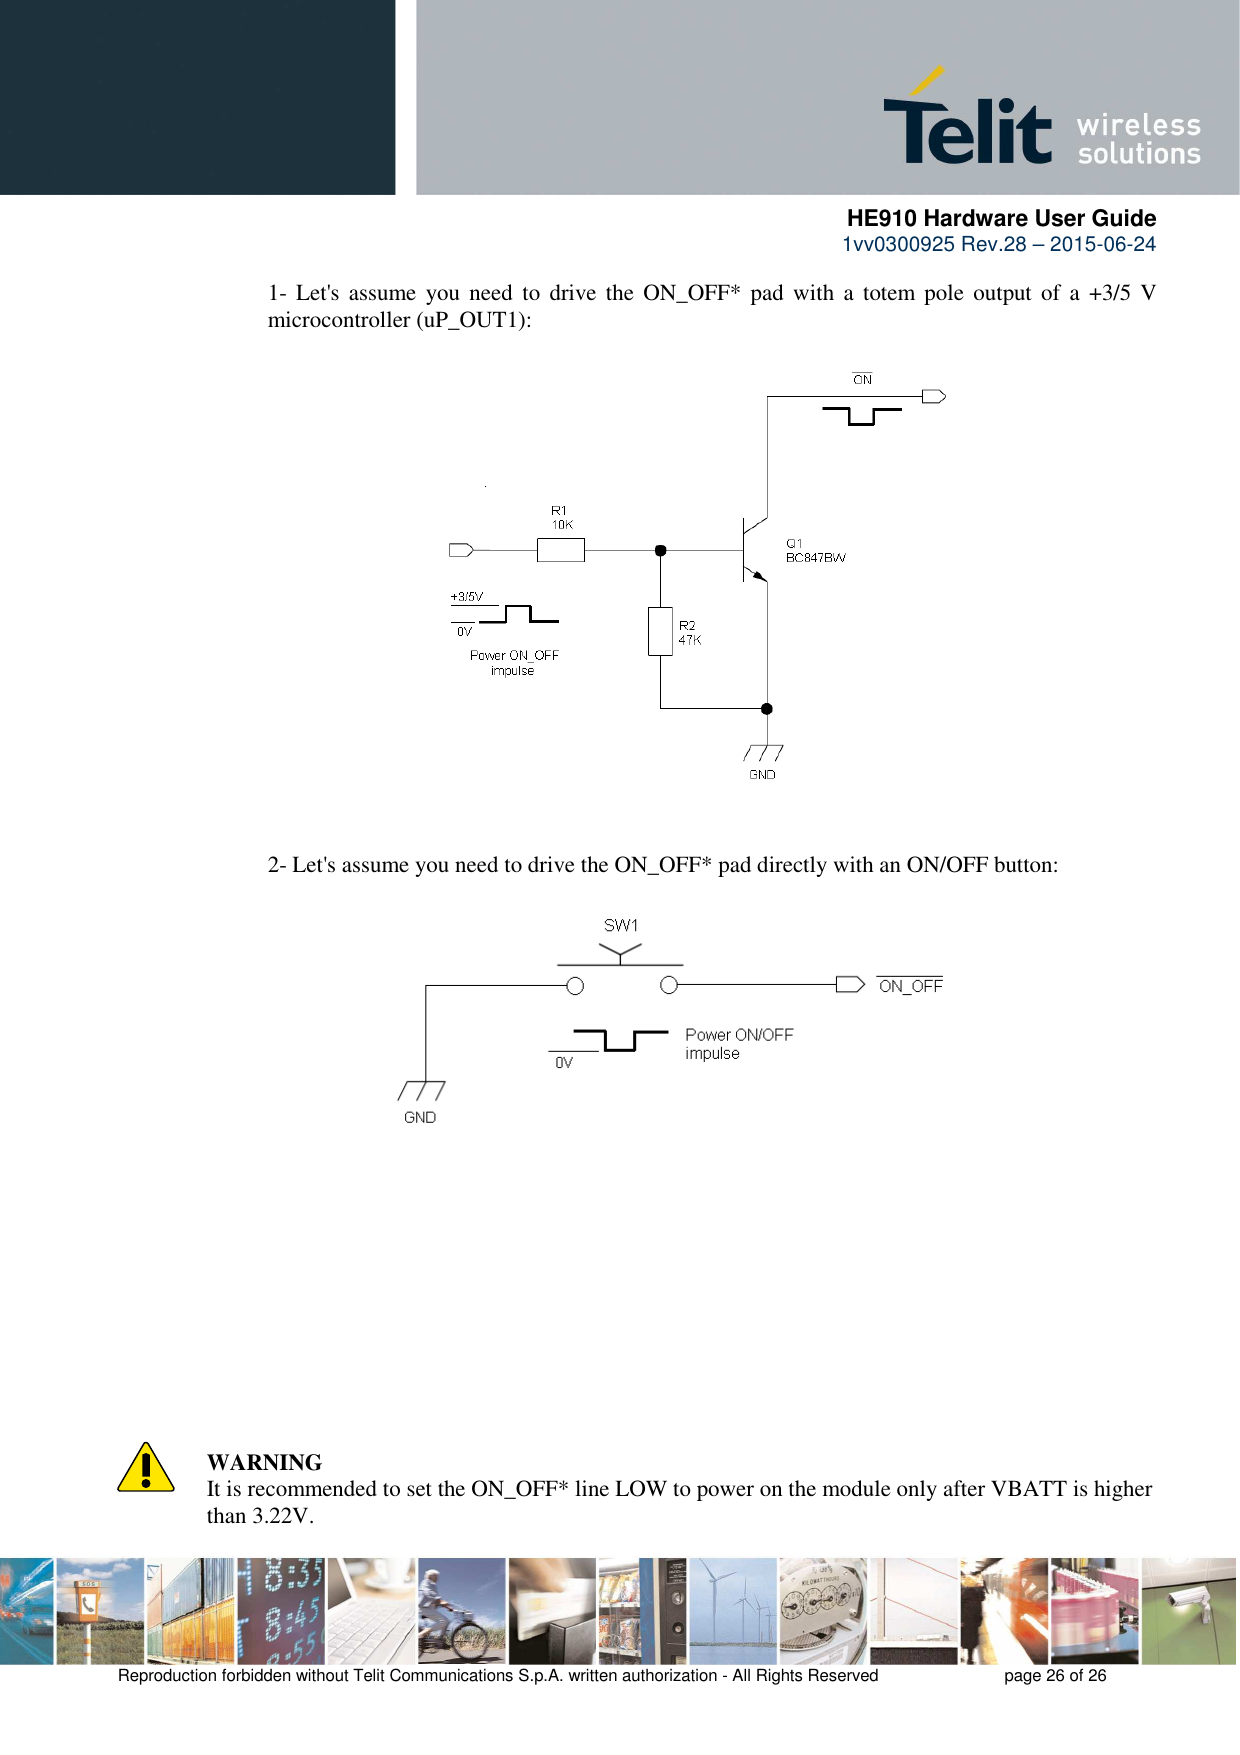      HE910 Hardware User Guide 1vv0300925 Rev.28 – 2015-06-24    Reproduction forbidden without Telit Communications S.p.A. written authorization - All Rights Reserved    page 26 of 26  1- Let&apos;s assume  you need  to  drive the  ON_OFF*  pad  with  a  totem pole  output  of  a  +3/5 V microcontroller (uP_OUT1):                     2- Let&apos;s assume you need to drive the ON_OFF* pad directly with an ON/OFF button:                       WARNING It is recommended to set the ON_OFF* line LOW to power on the module only after VBATT is higher than 3.22V. 